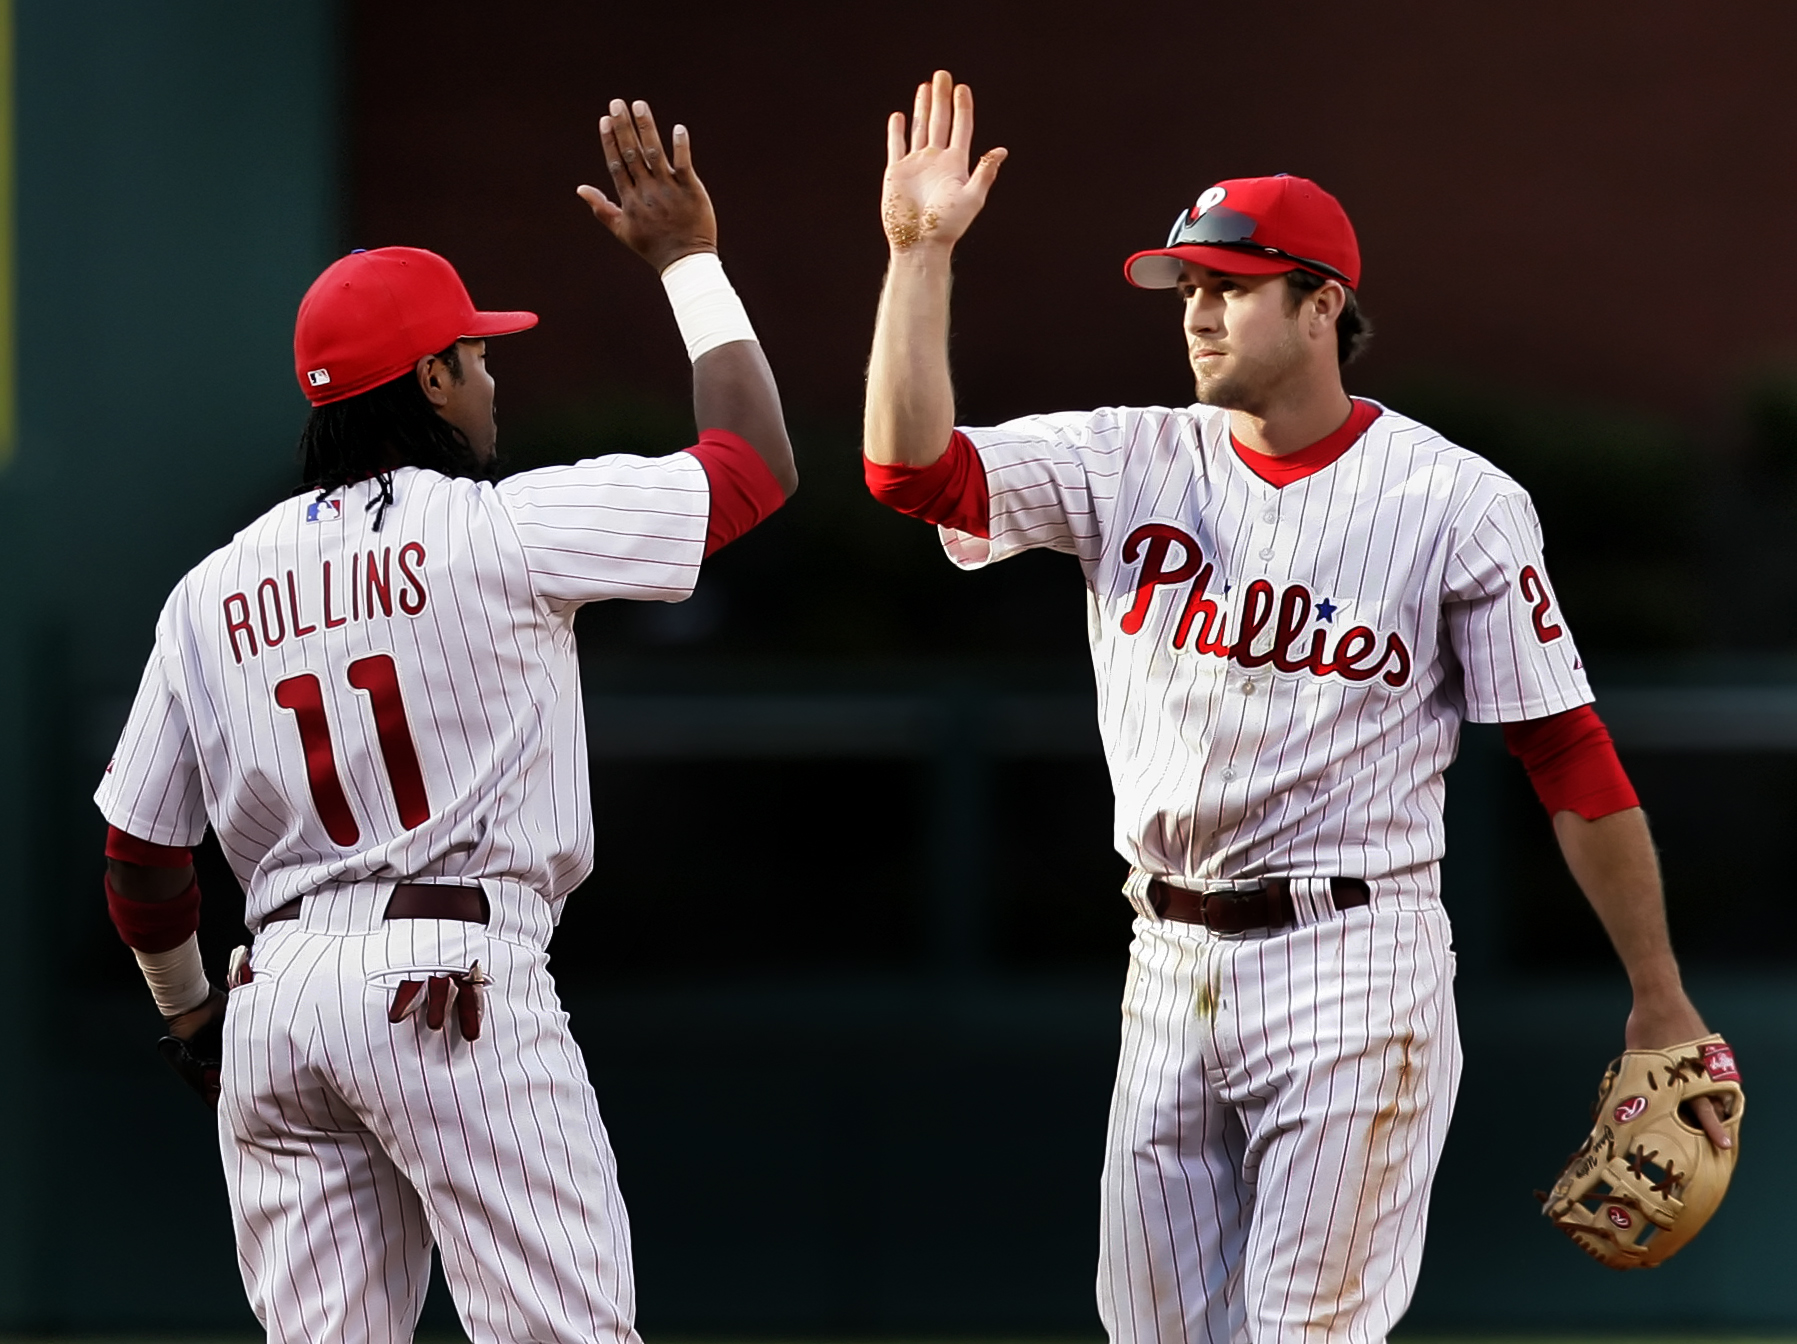 Phillies: Top five moments of Jimmy Rollins' career